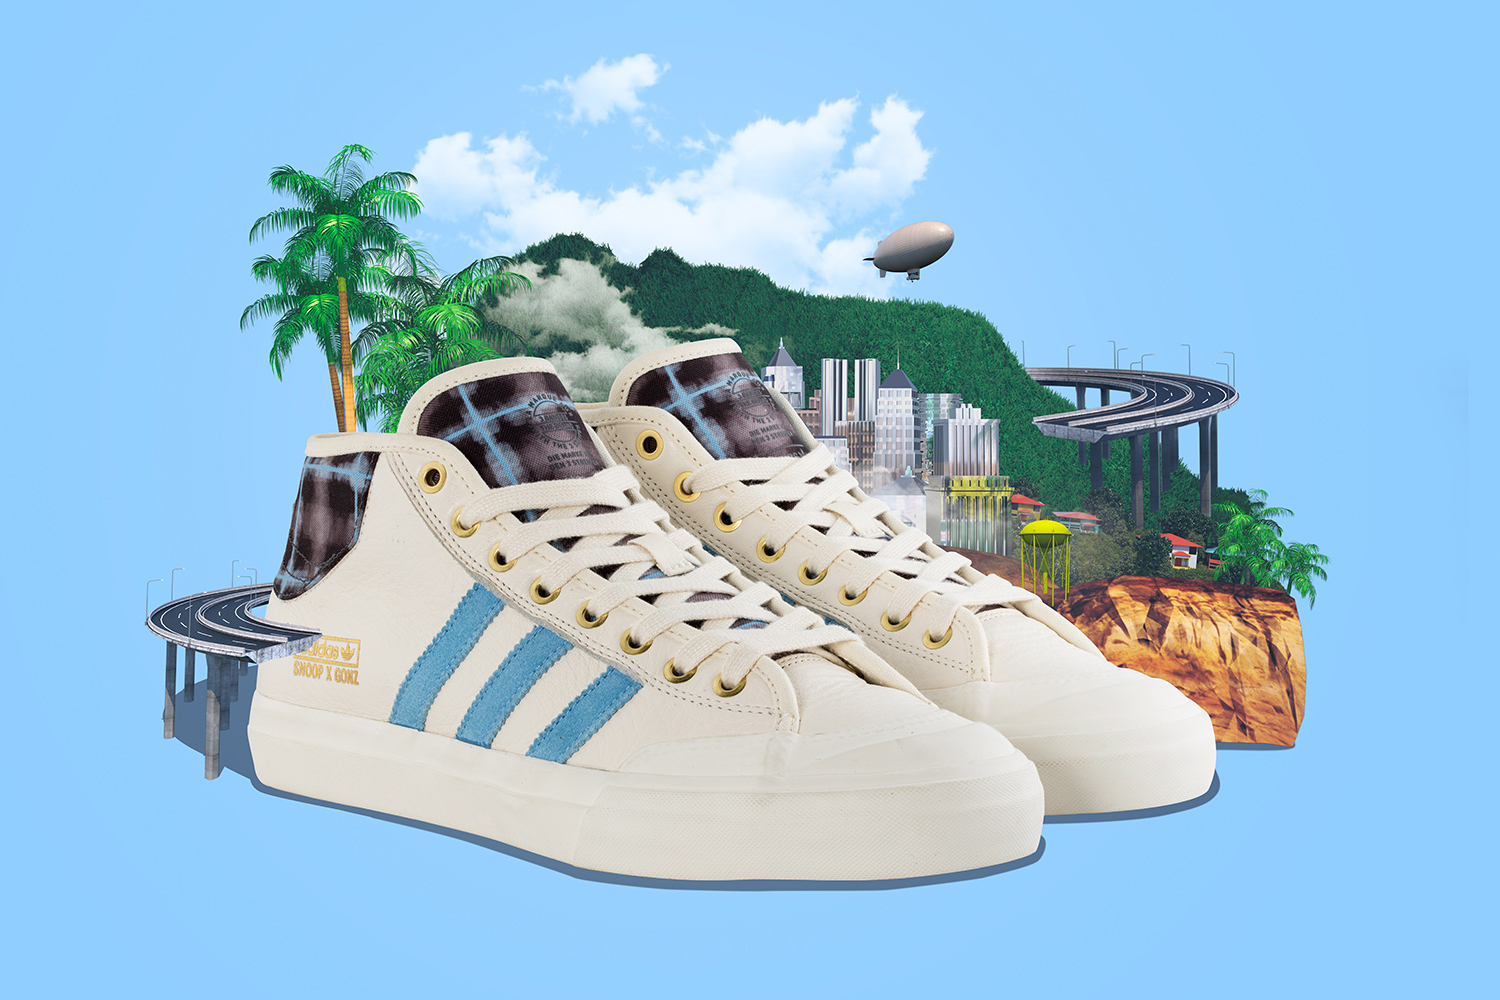 adidas Skateboarding “L.A. Stories” Collection by Snoop Dogg & Mark Gonzales